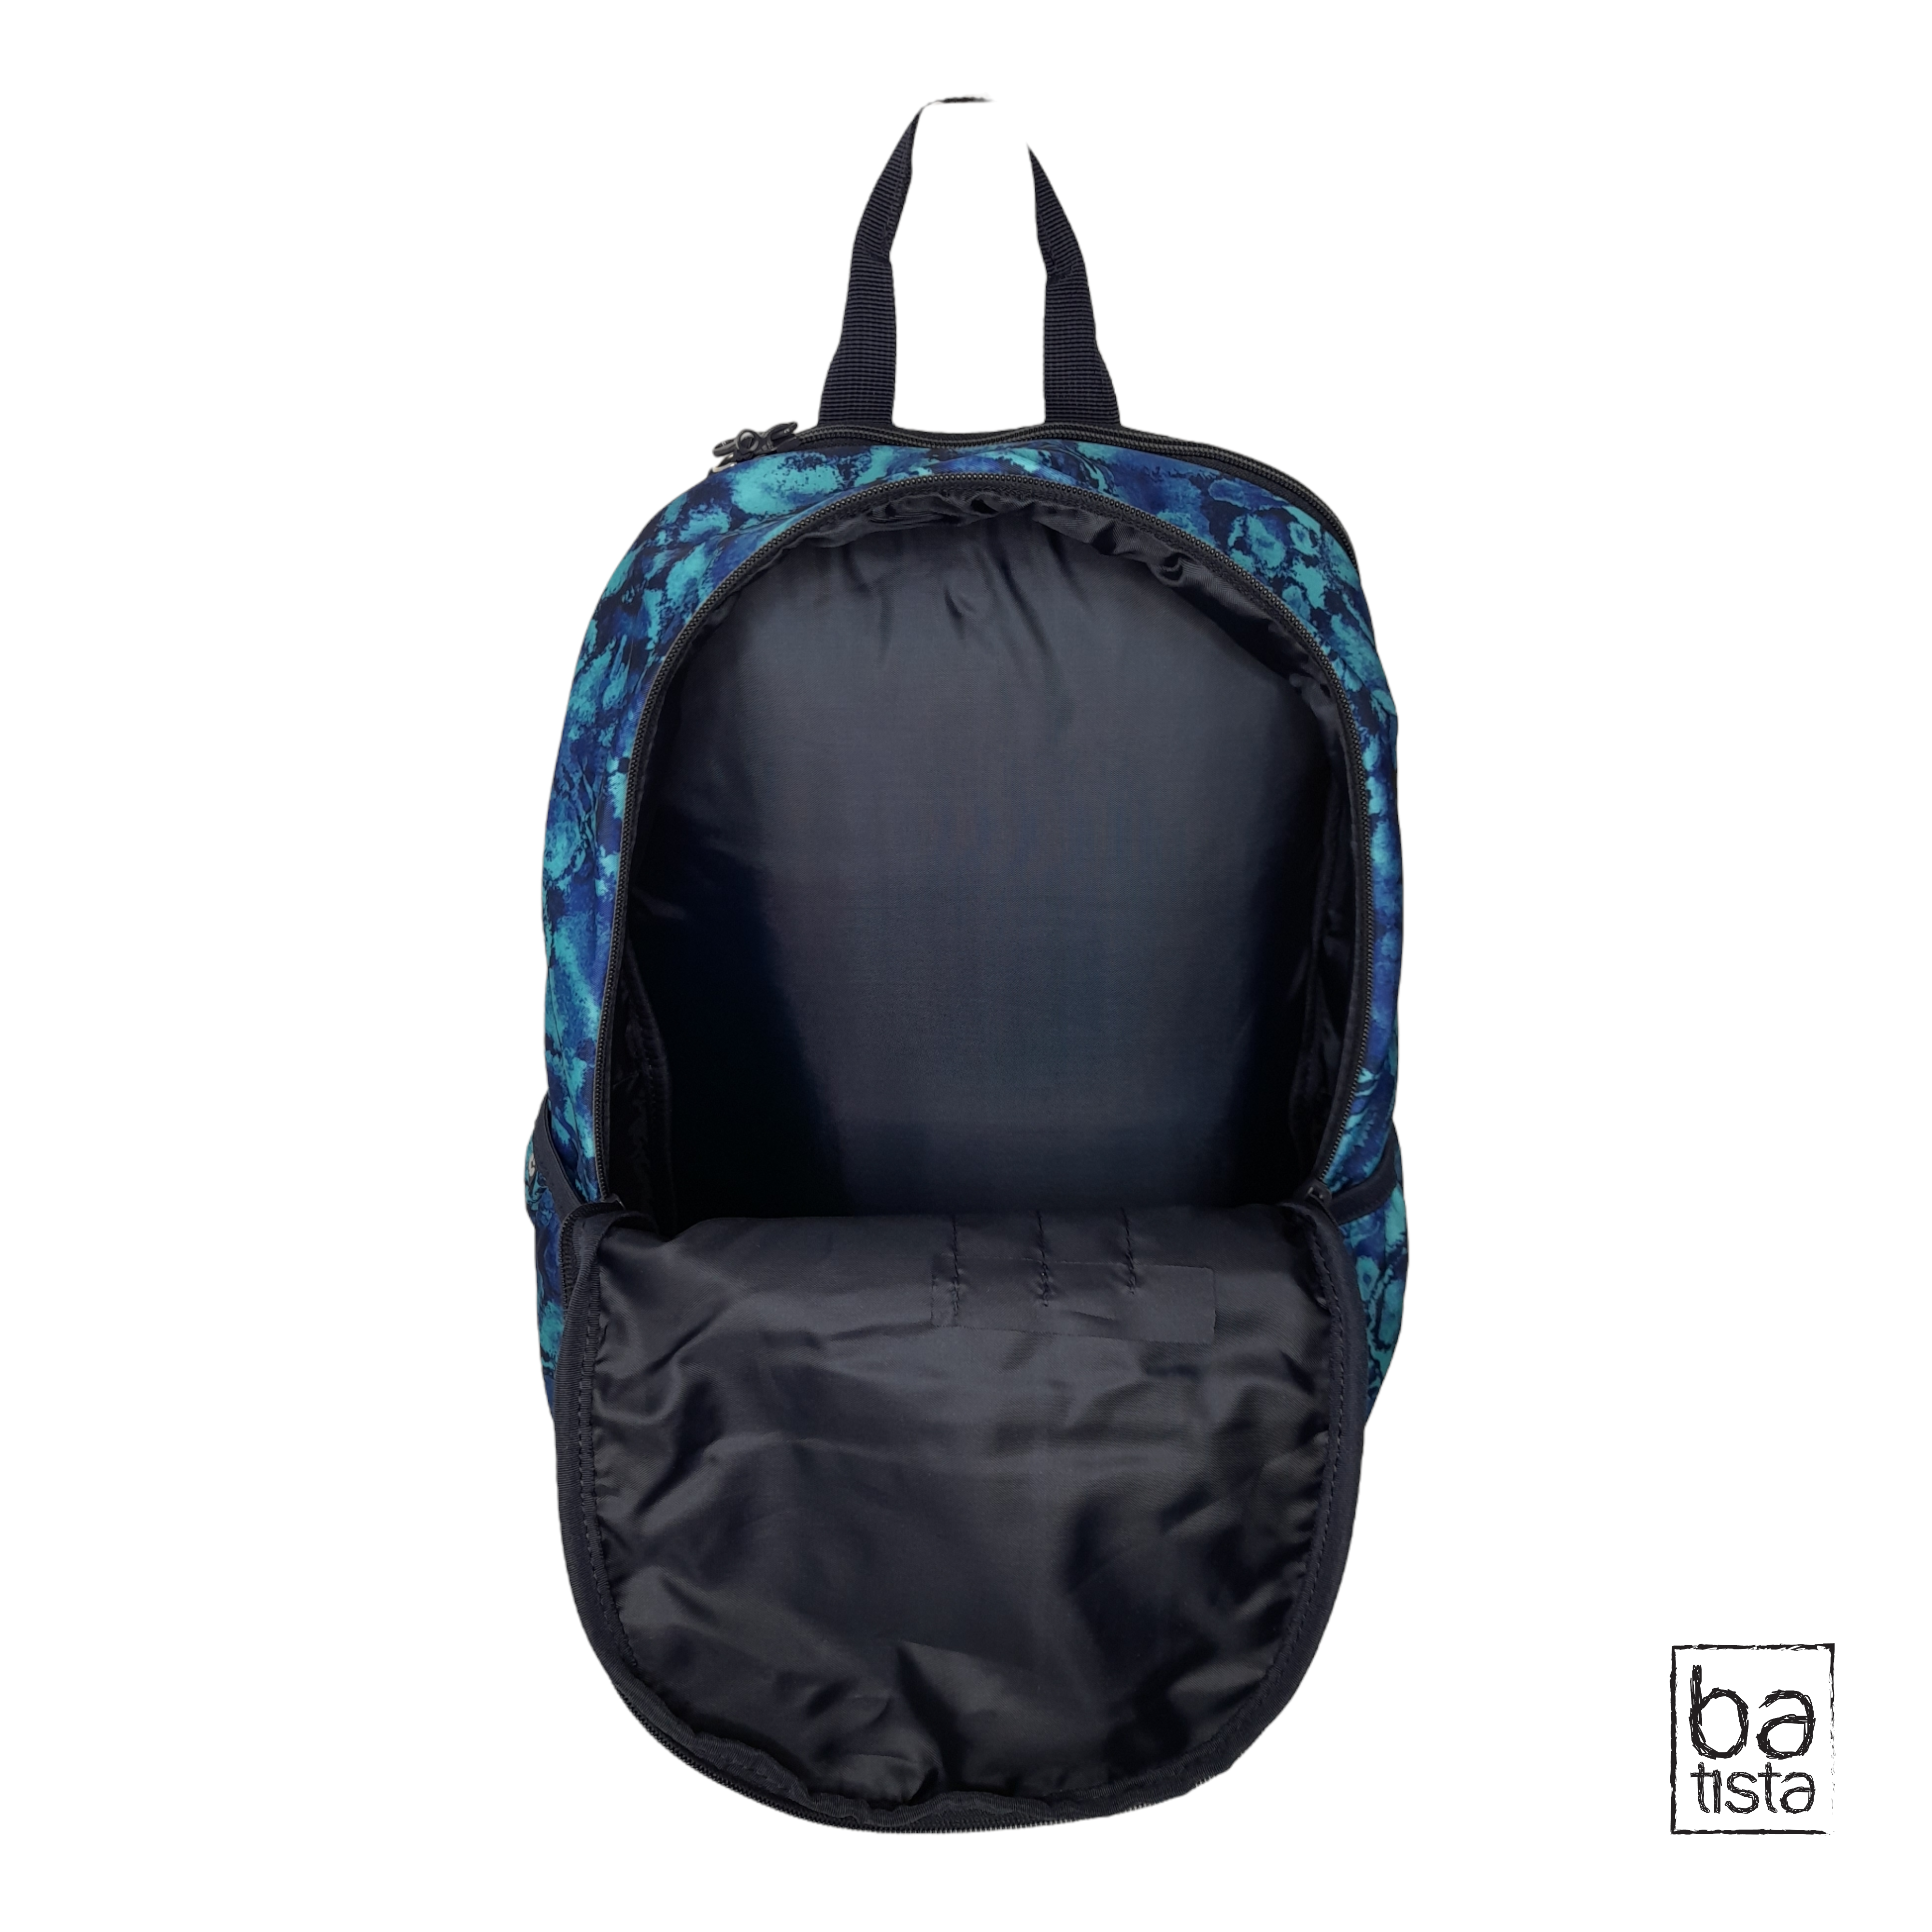 Morral Totto Tracer 2 5J8 18.08 Lts